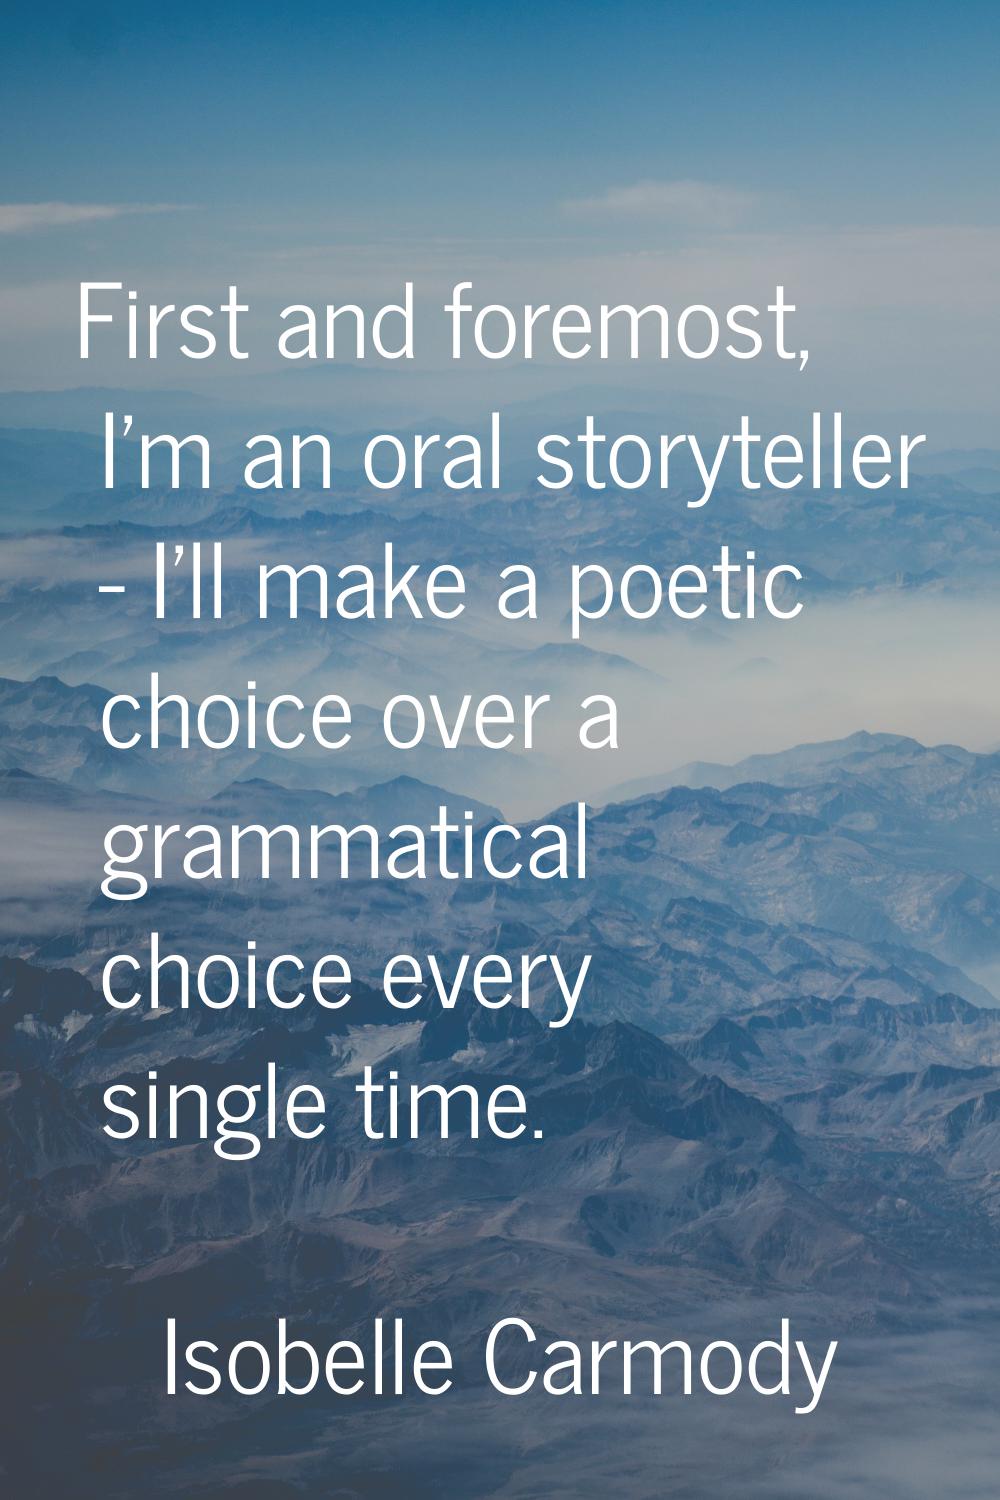 First and foremost, I'm an oral storyteller - I'll make a poetic choice over a grammatical choice e